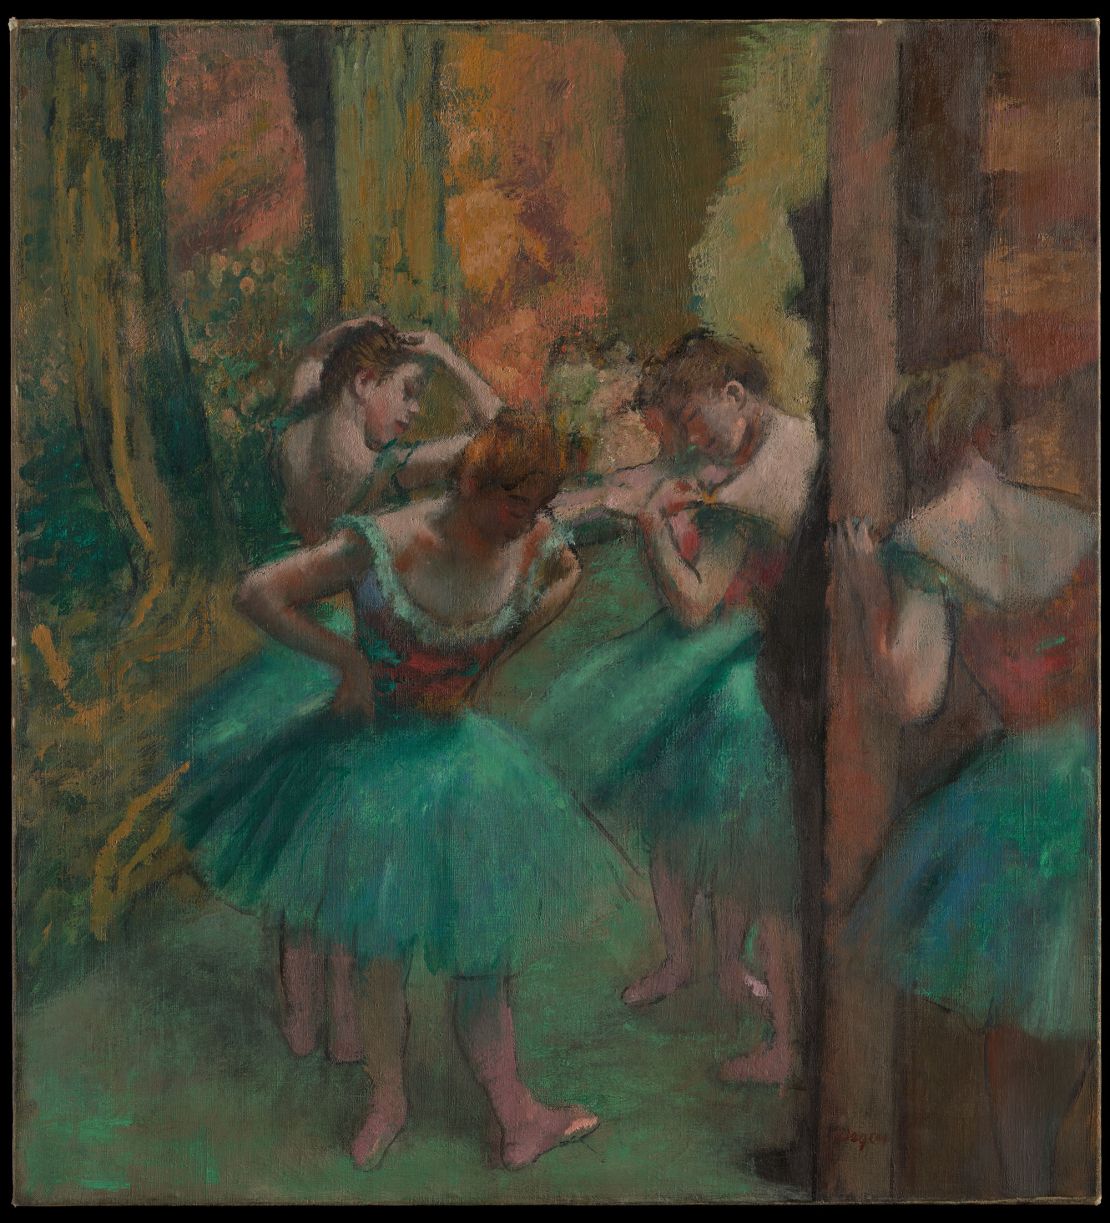 Degas favored scenes of ballet dancers, laundresses, milliners and other members from the lower echelons of Parisian society.